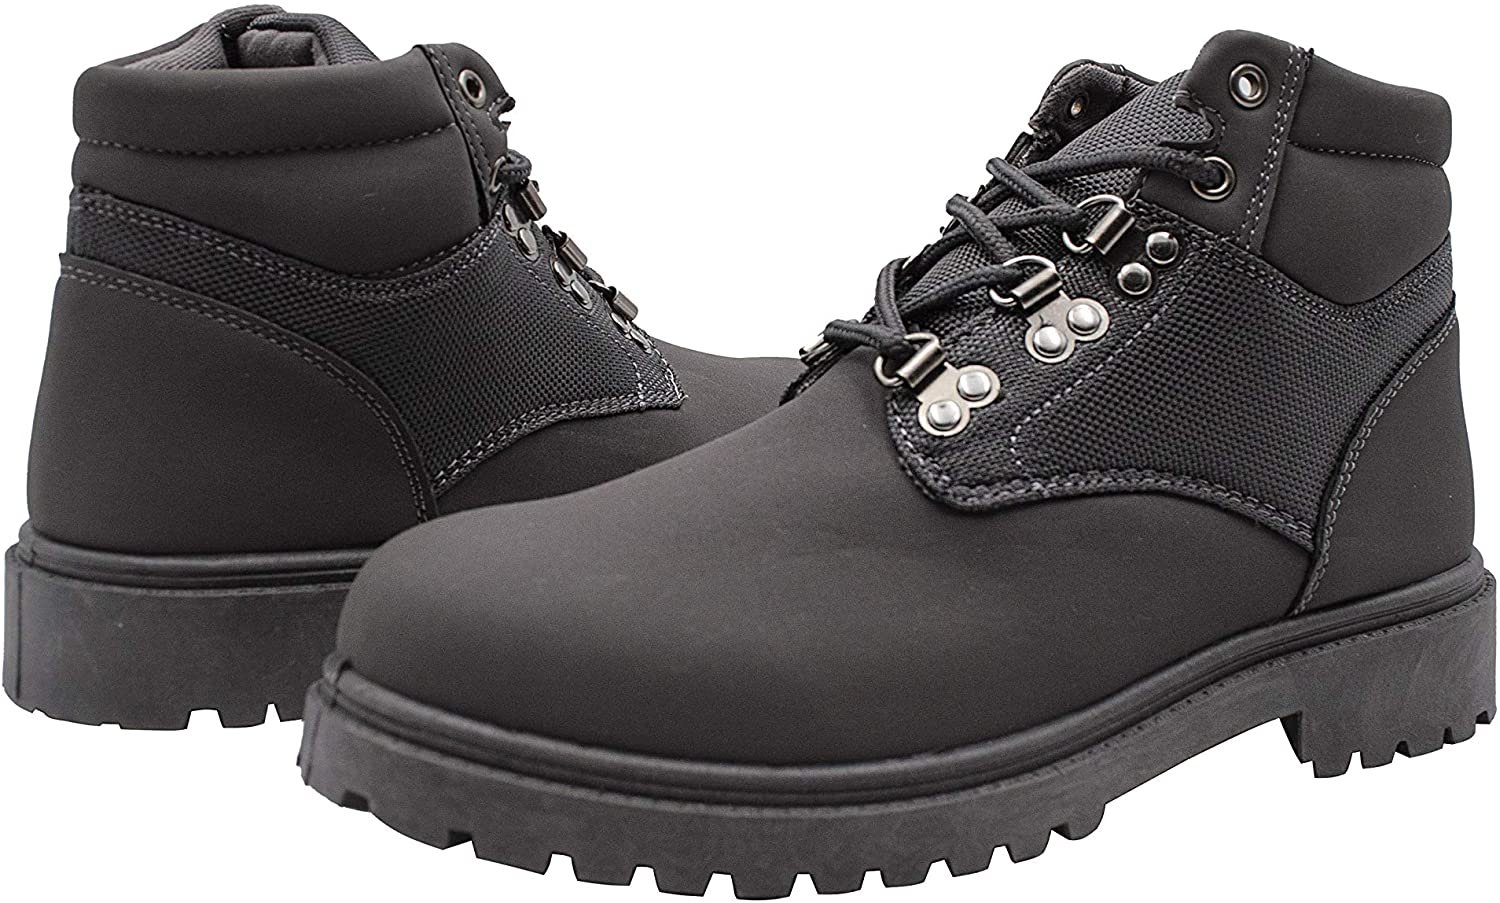 Gold Toe Men’s Lace-Up Nubuck Work Boots, Outdoor Hiking Comfort Fall Winter Shoes - image 4 of 4